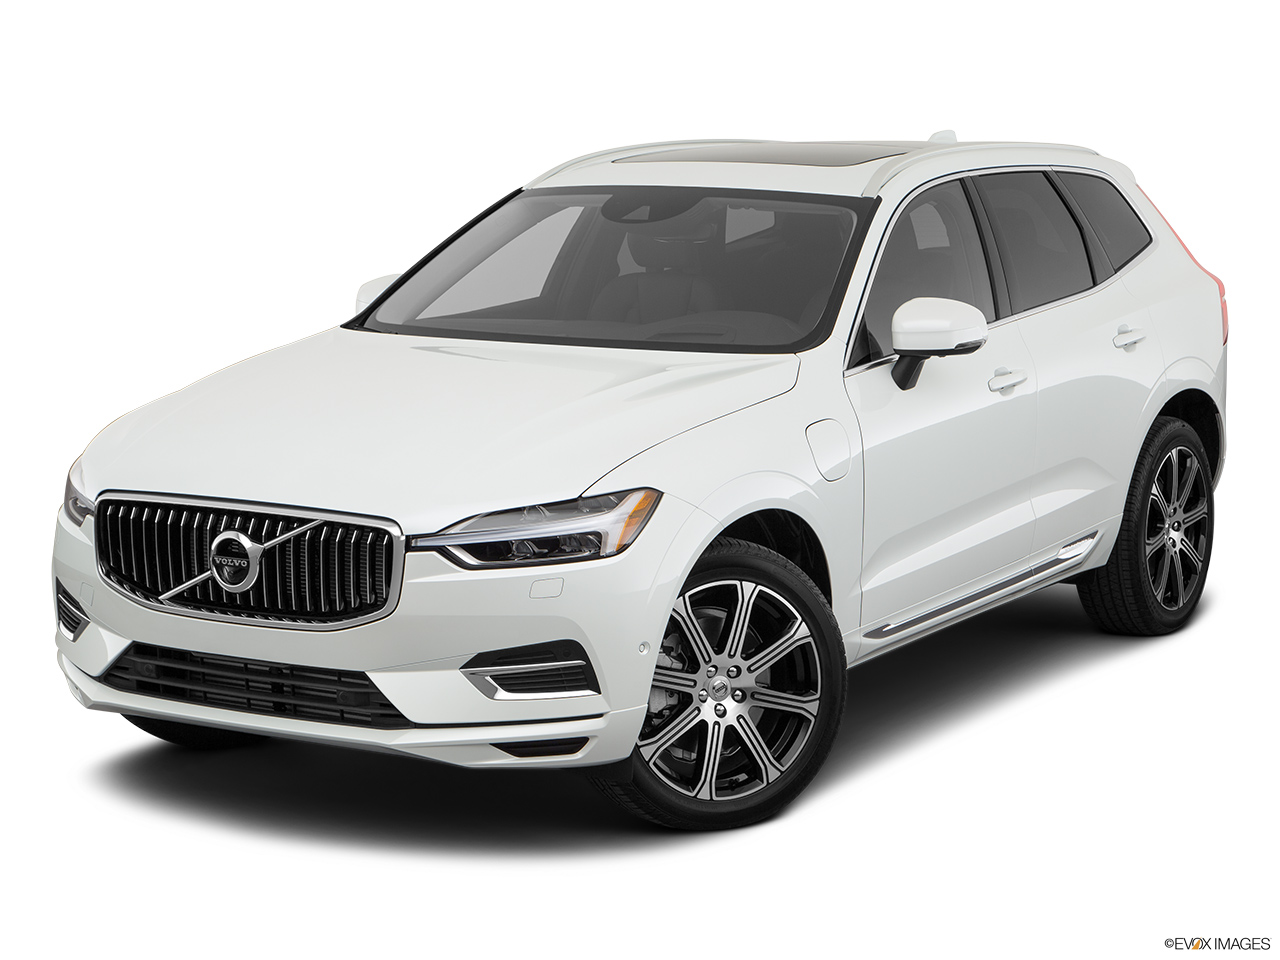 2019 Volvo XC60 T8 Inscription eAWD Plug-in Hybrid Front angle view. 